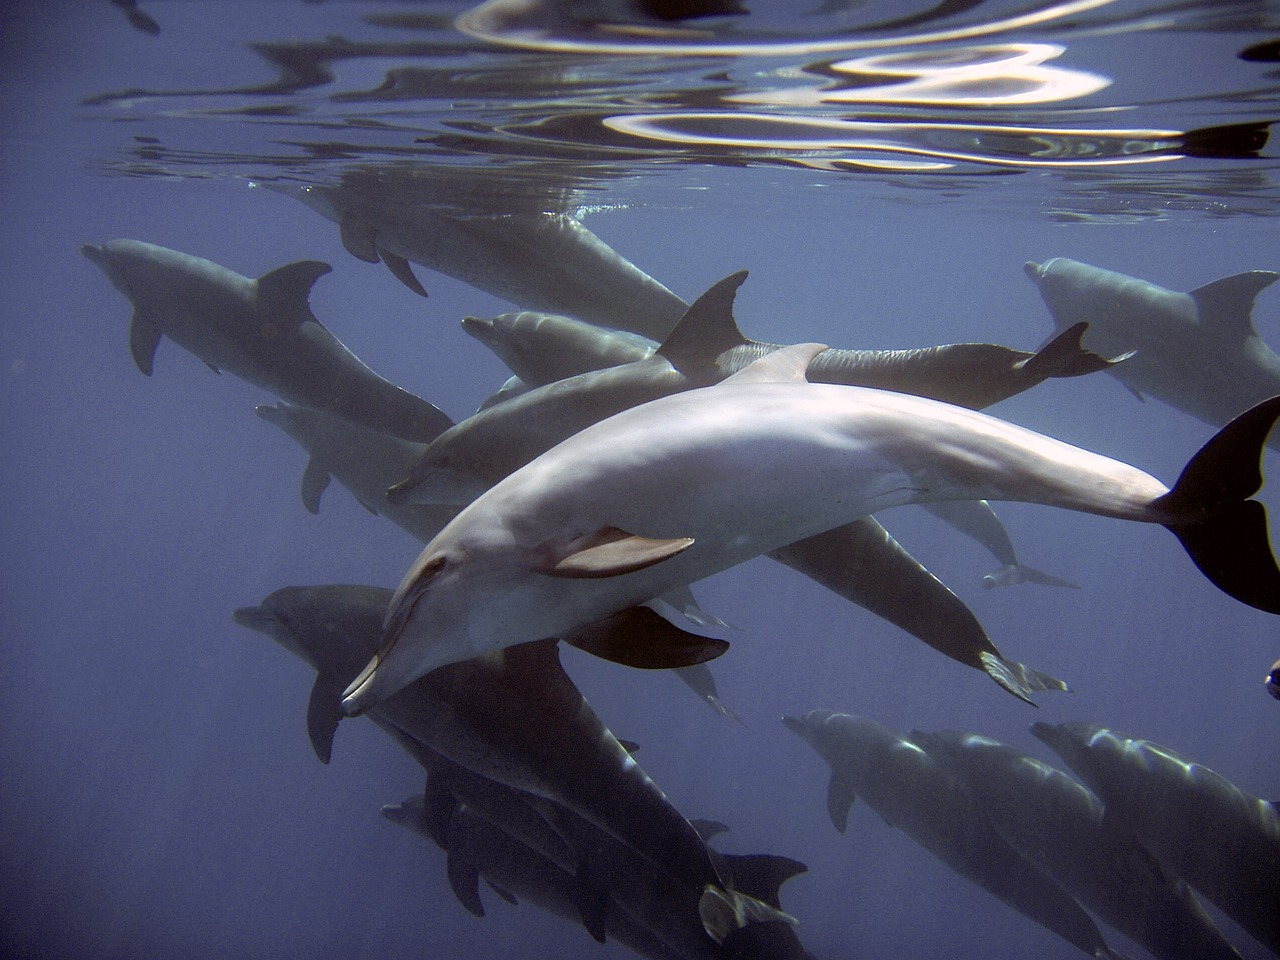 a group of dolphins swimming in the ocean, by Juergen von Huendeberg, flickr, cinématique”, 2 0 0 0's photo, depth of field”, joseph todorovitch ”